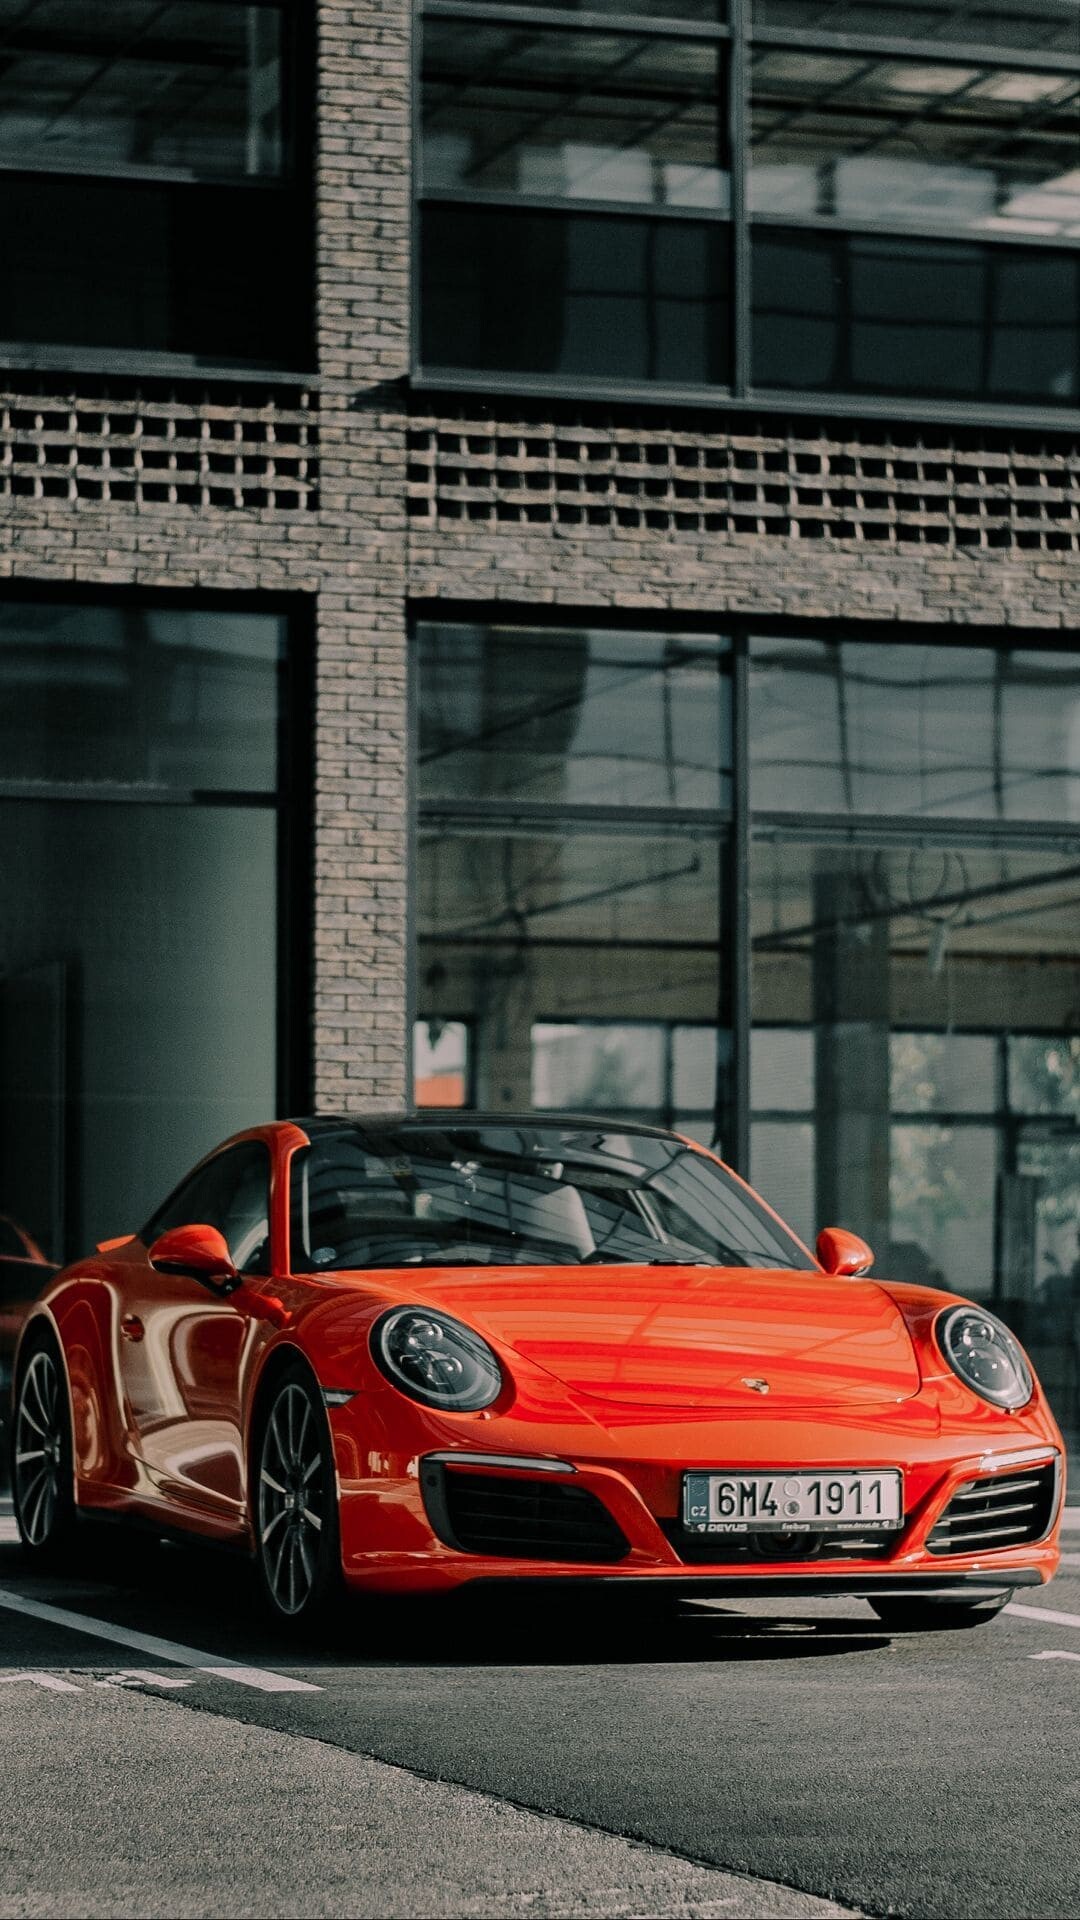 Porsche: A reputed German automobile manufacturer that specializes in producing high-end sports cars, sedans, and SUVs. 1080x1920 Full HD Background.